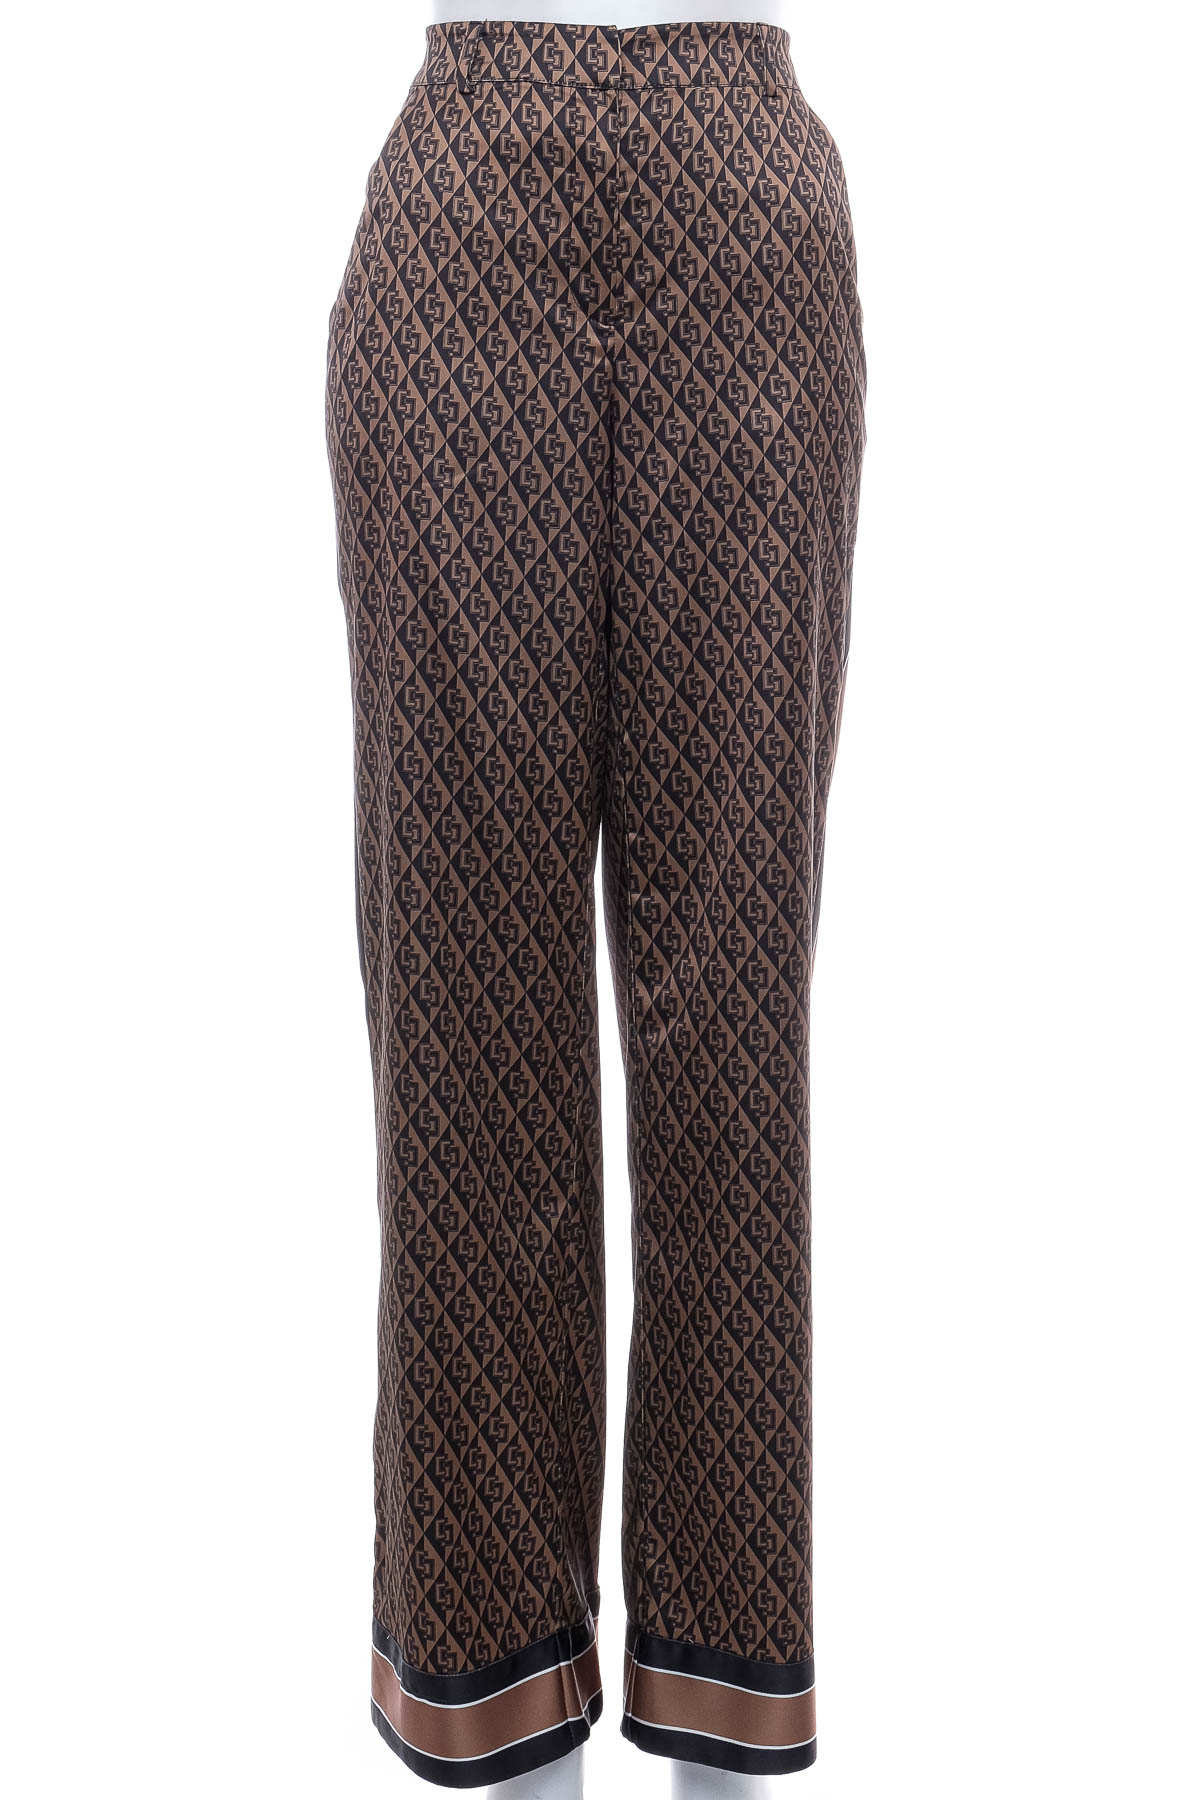 Women's trousers - Costes - 0